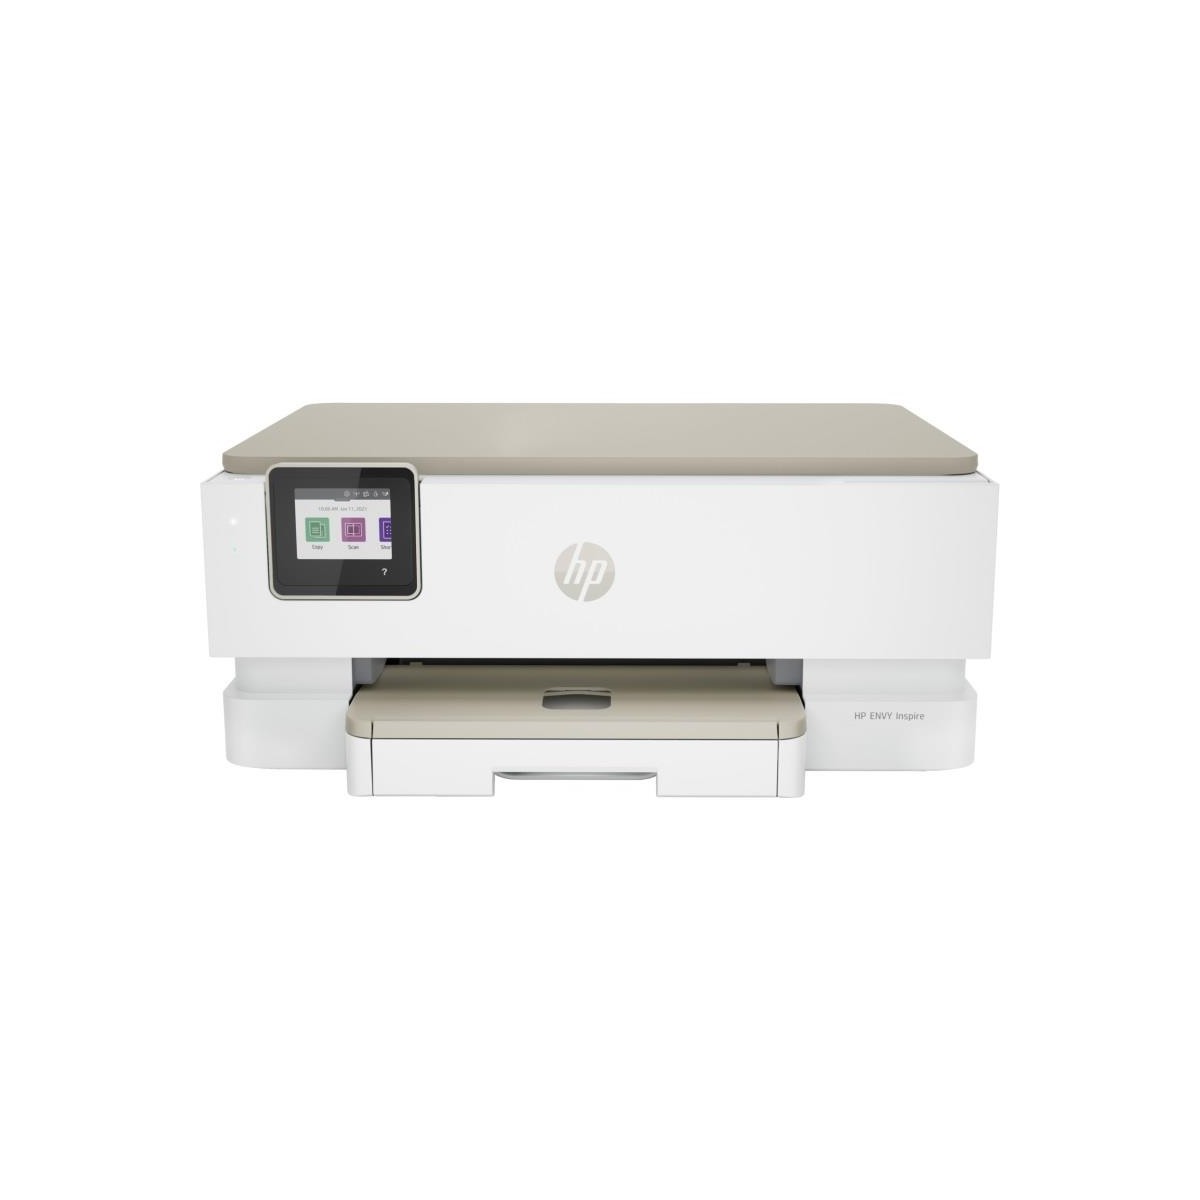 HP ENVY Inspire 7220e All-in-One